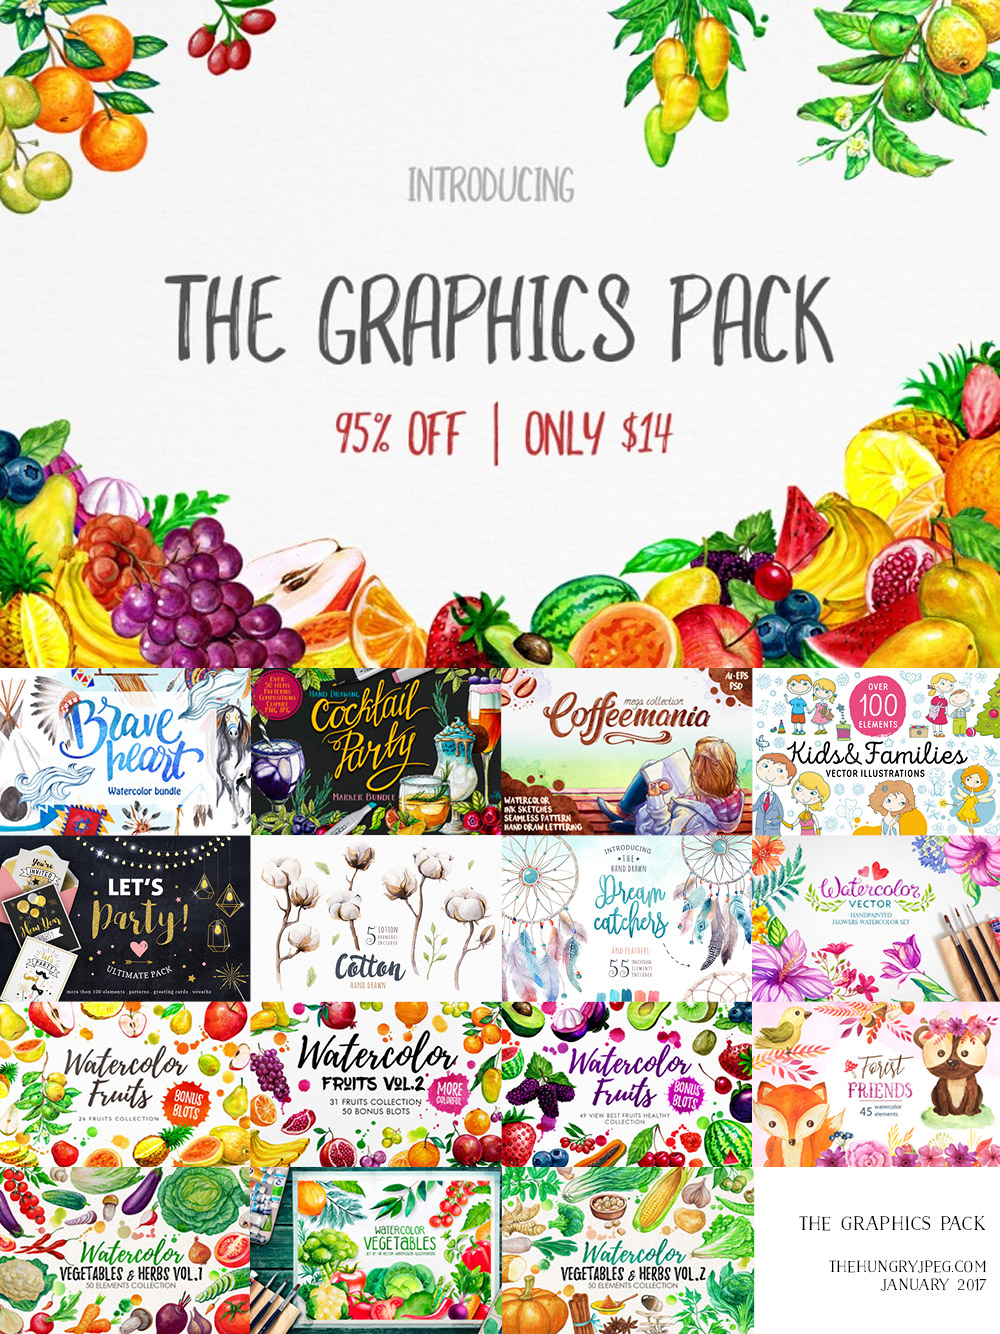 The Graphics Pack